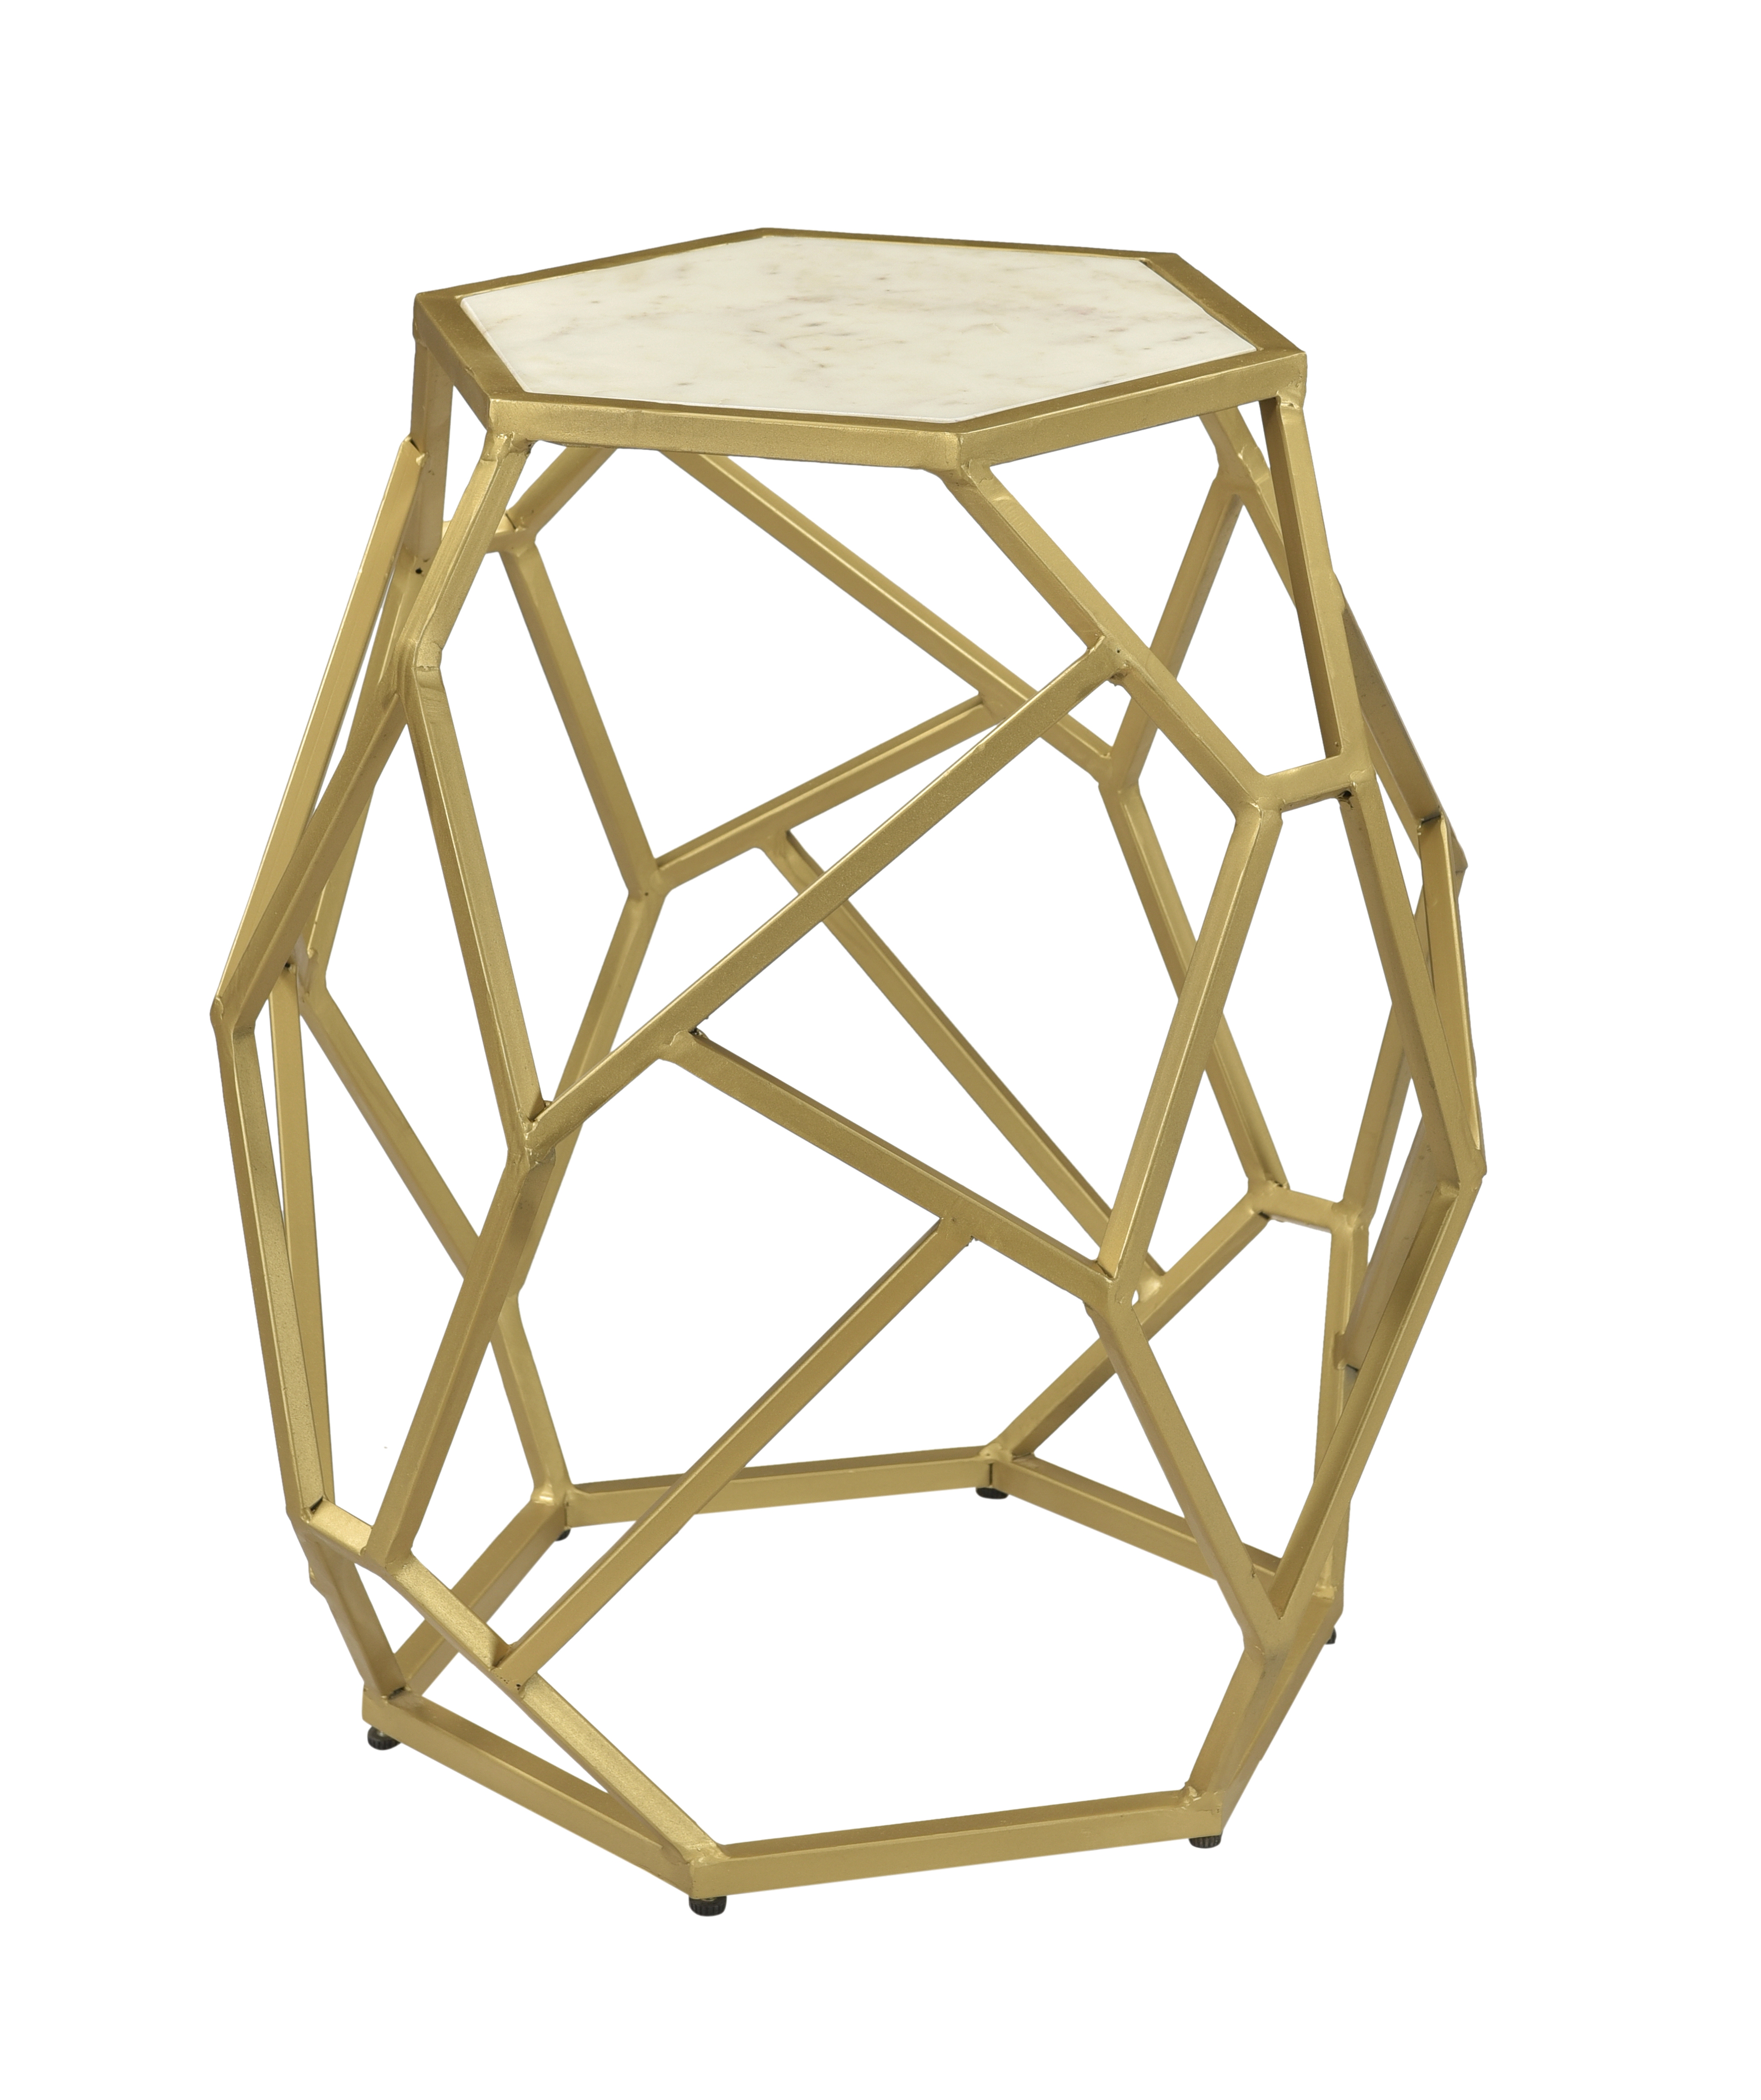 Hexagonal Accent Table - White Marble & Gold Powder Coat - Image 1